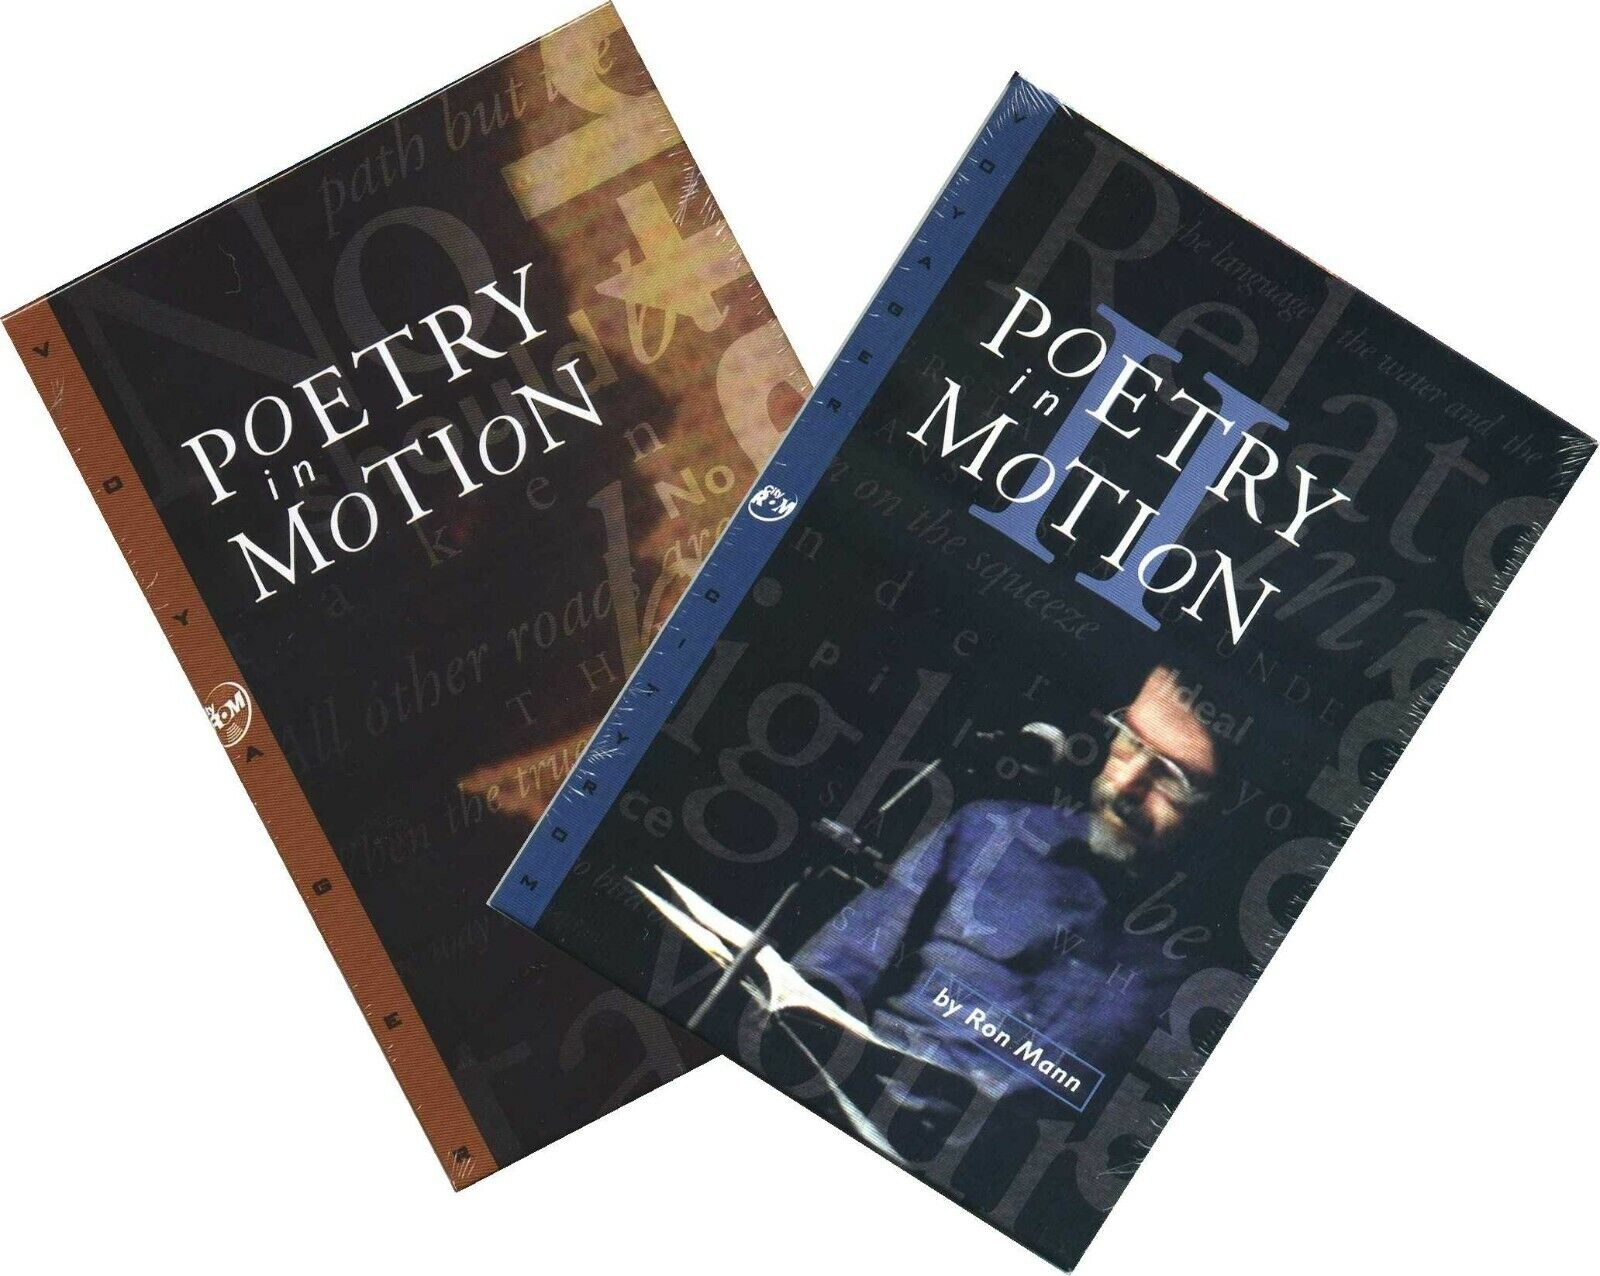 Poetry In Motion 1 & 2 - Sealed Collectible CD-ROMs Rare OOP Voyager - PC or MAC